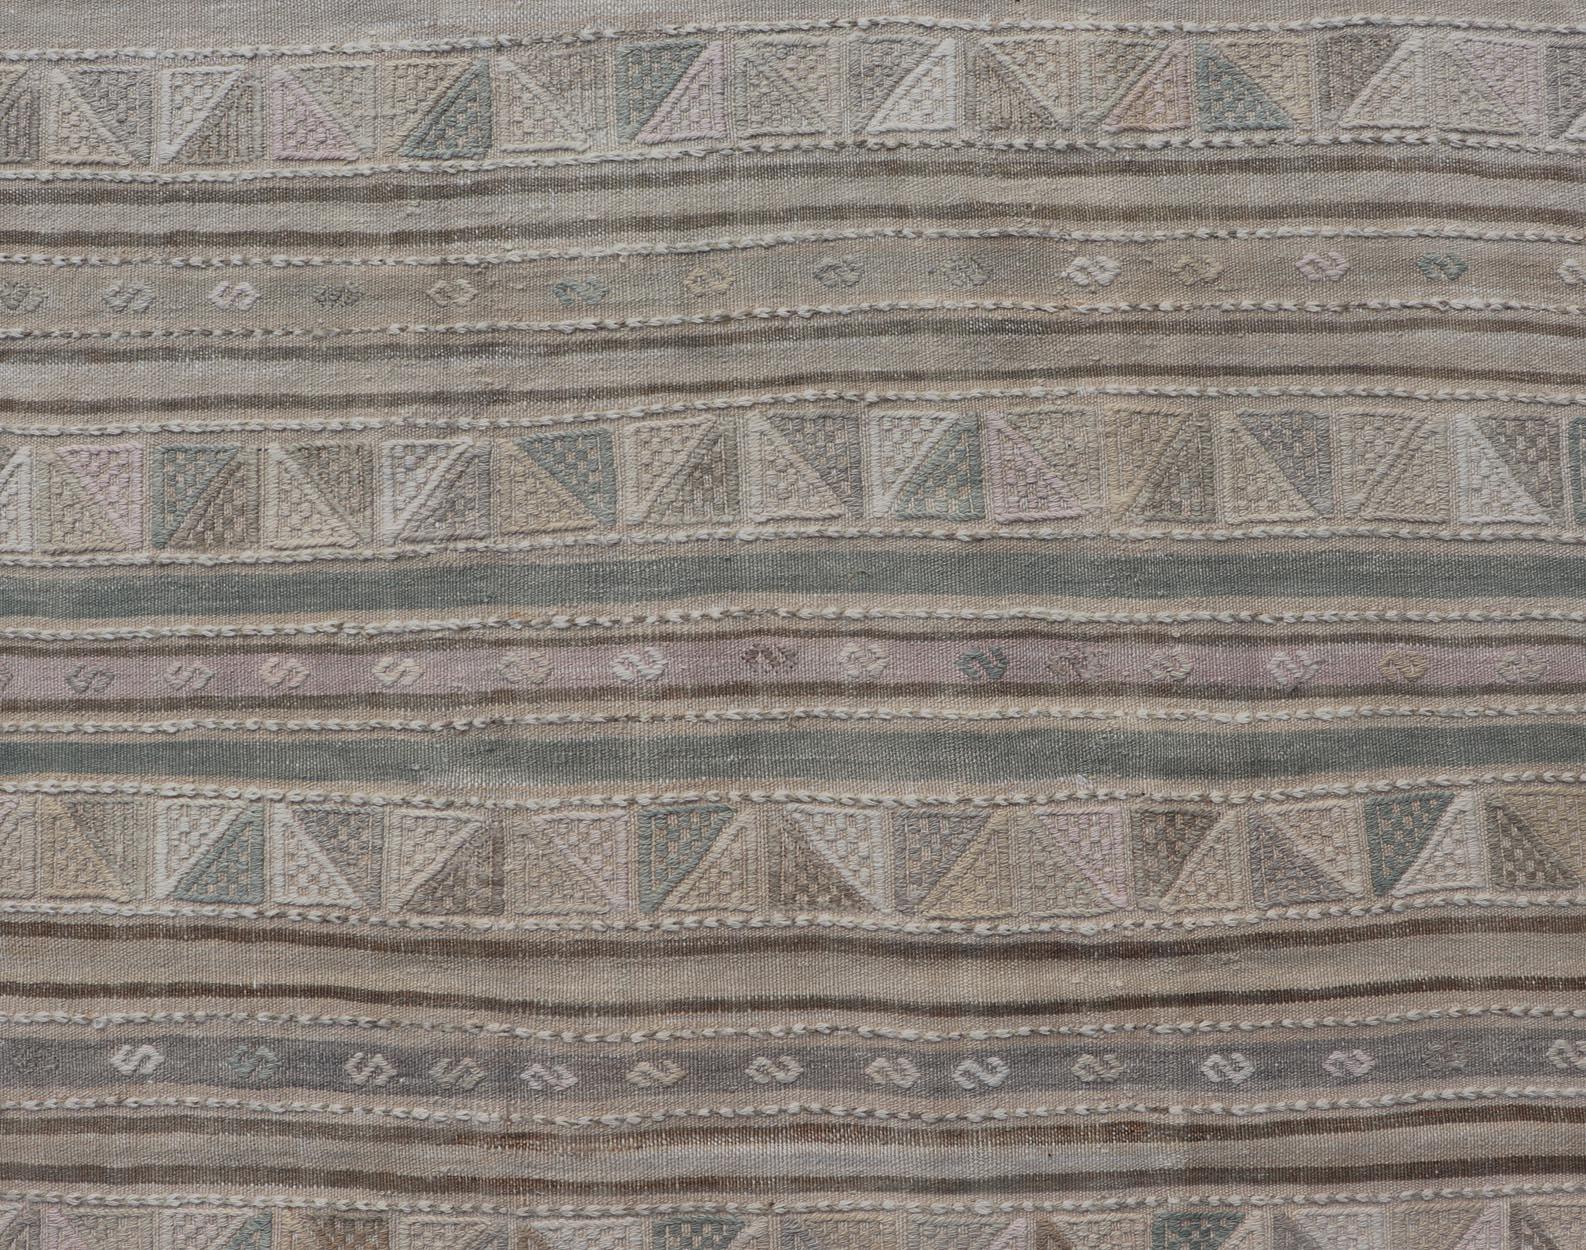 Wool Turkish Flat-Weave with Embroideries Kilim in Taupe, Green, Brown, and Tan For Sale